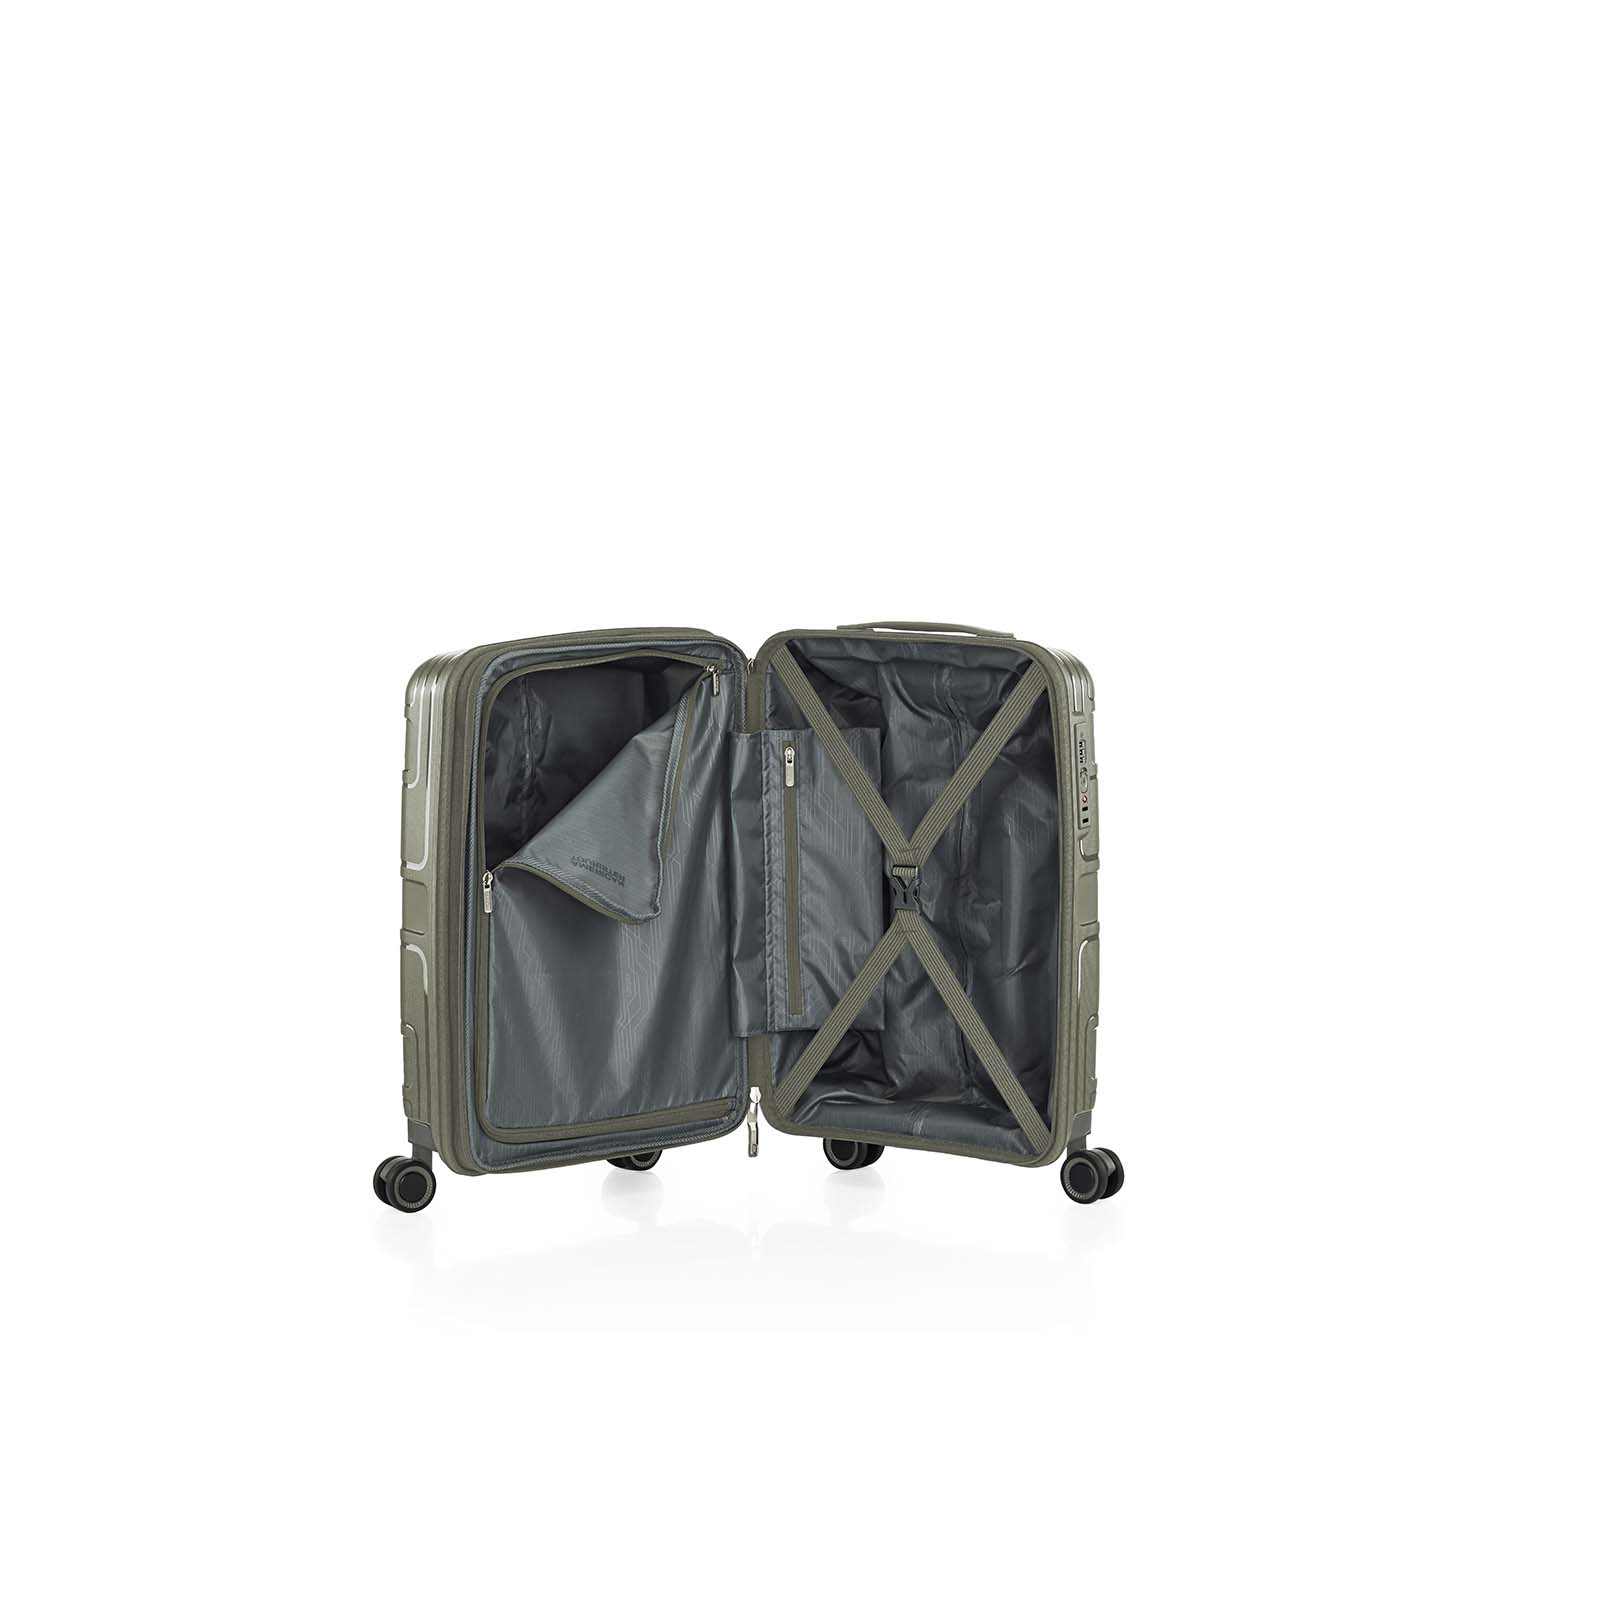 American-Tourister-Light-Max-55cm-Carry-On-Suitcase-Khaki-Open